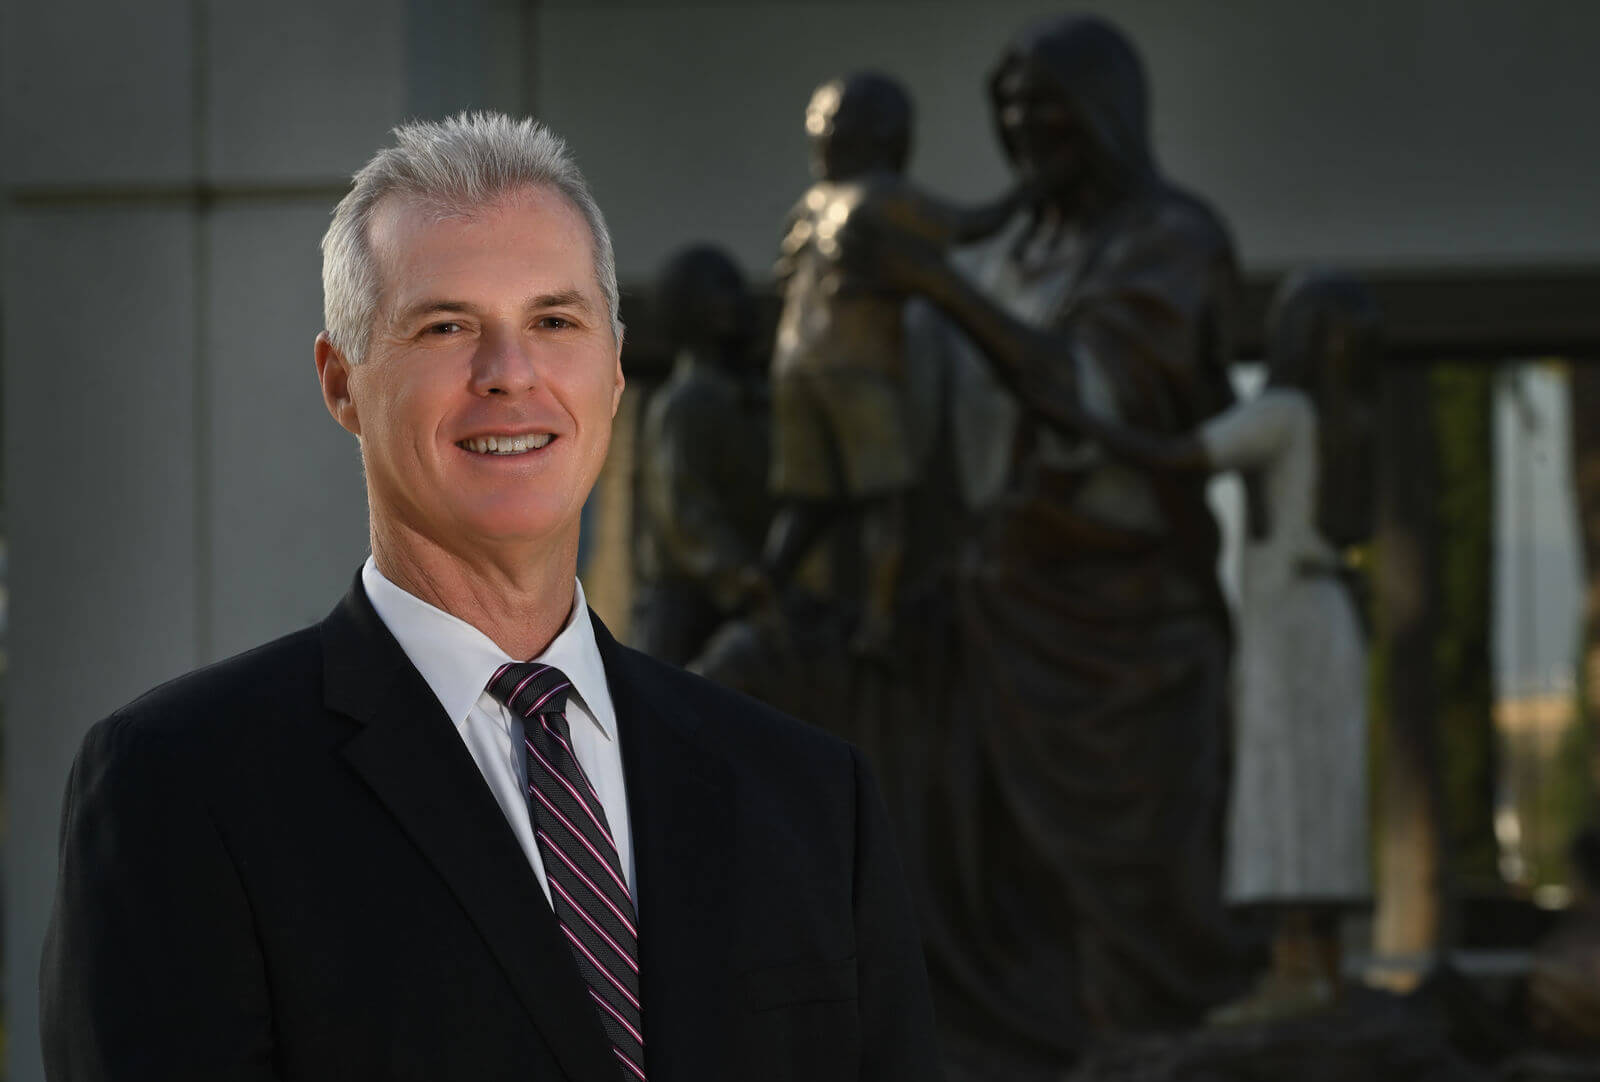 Michael P. Brennan, former Servite High School principal, appointed as new president of Mater Dei High School